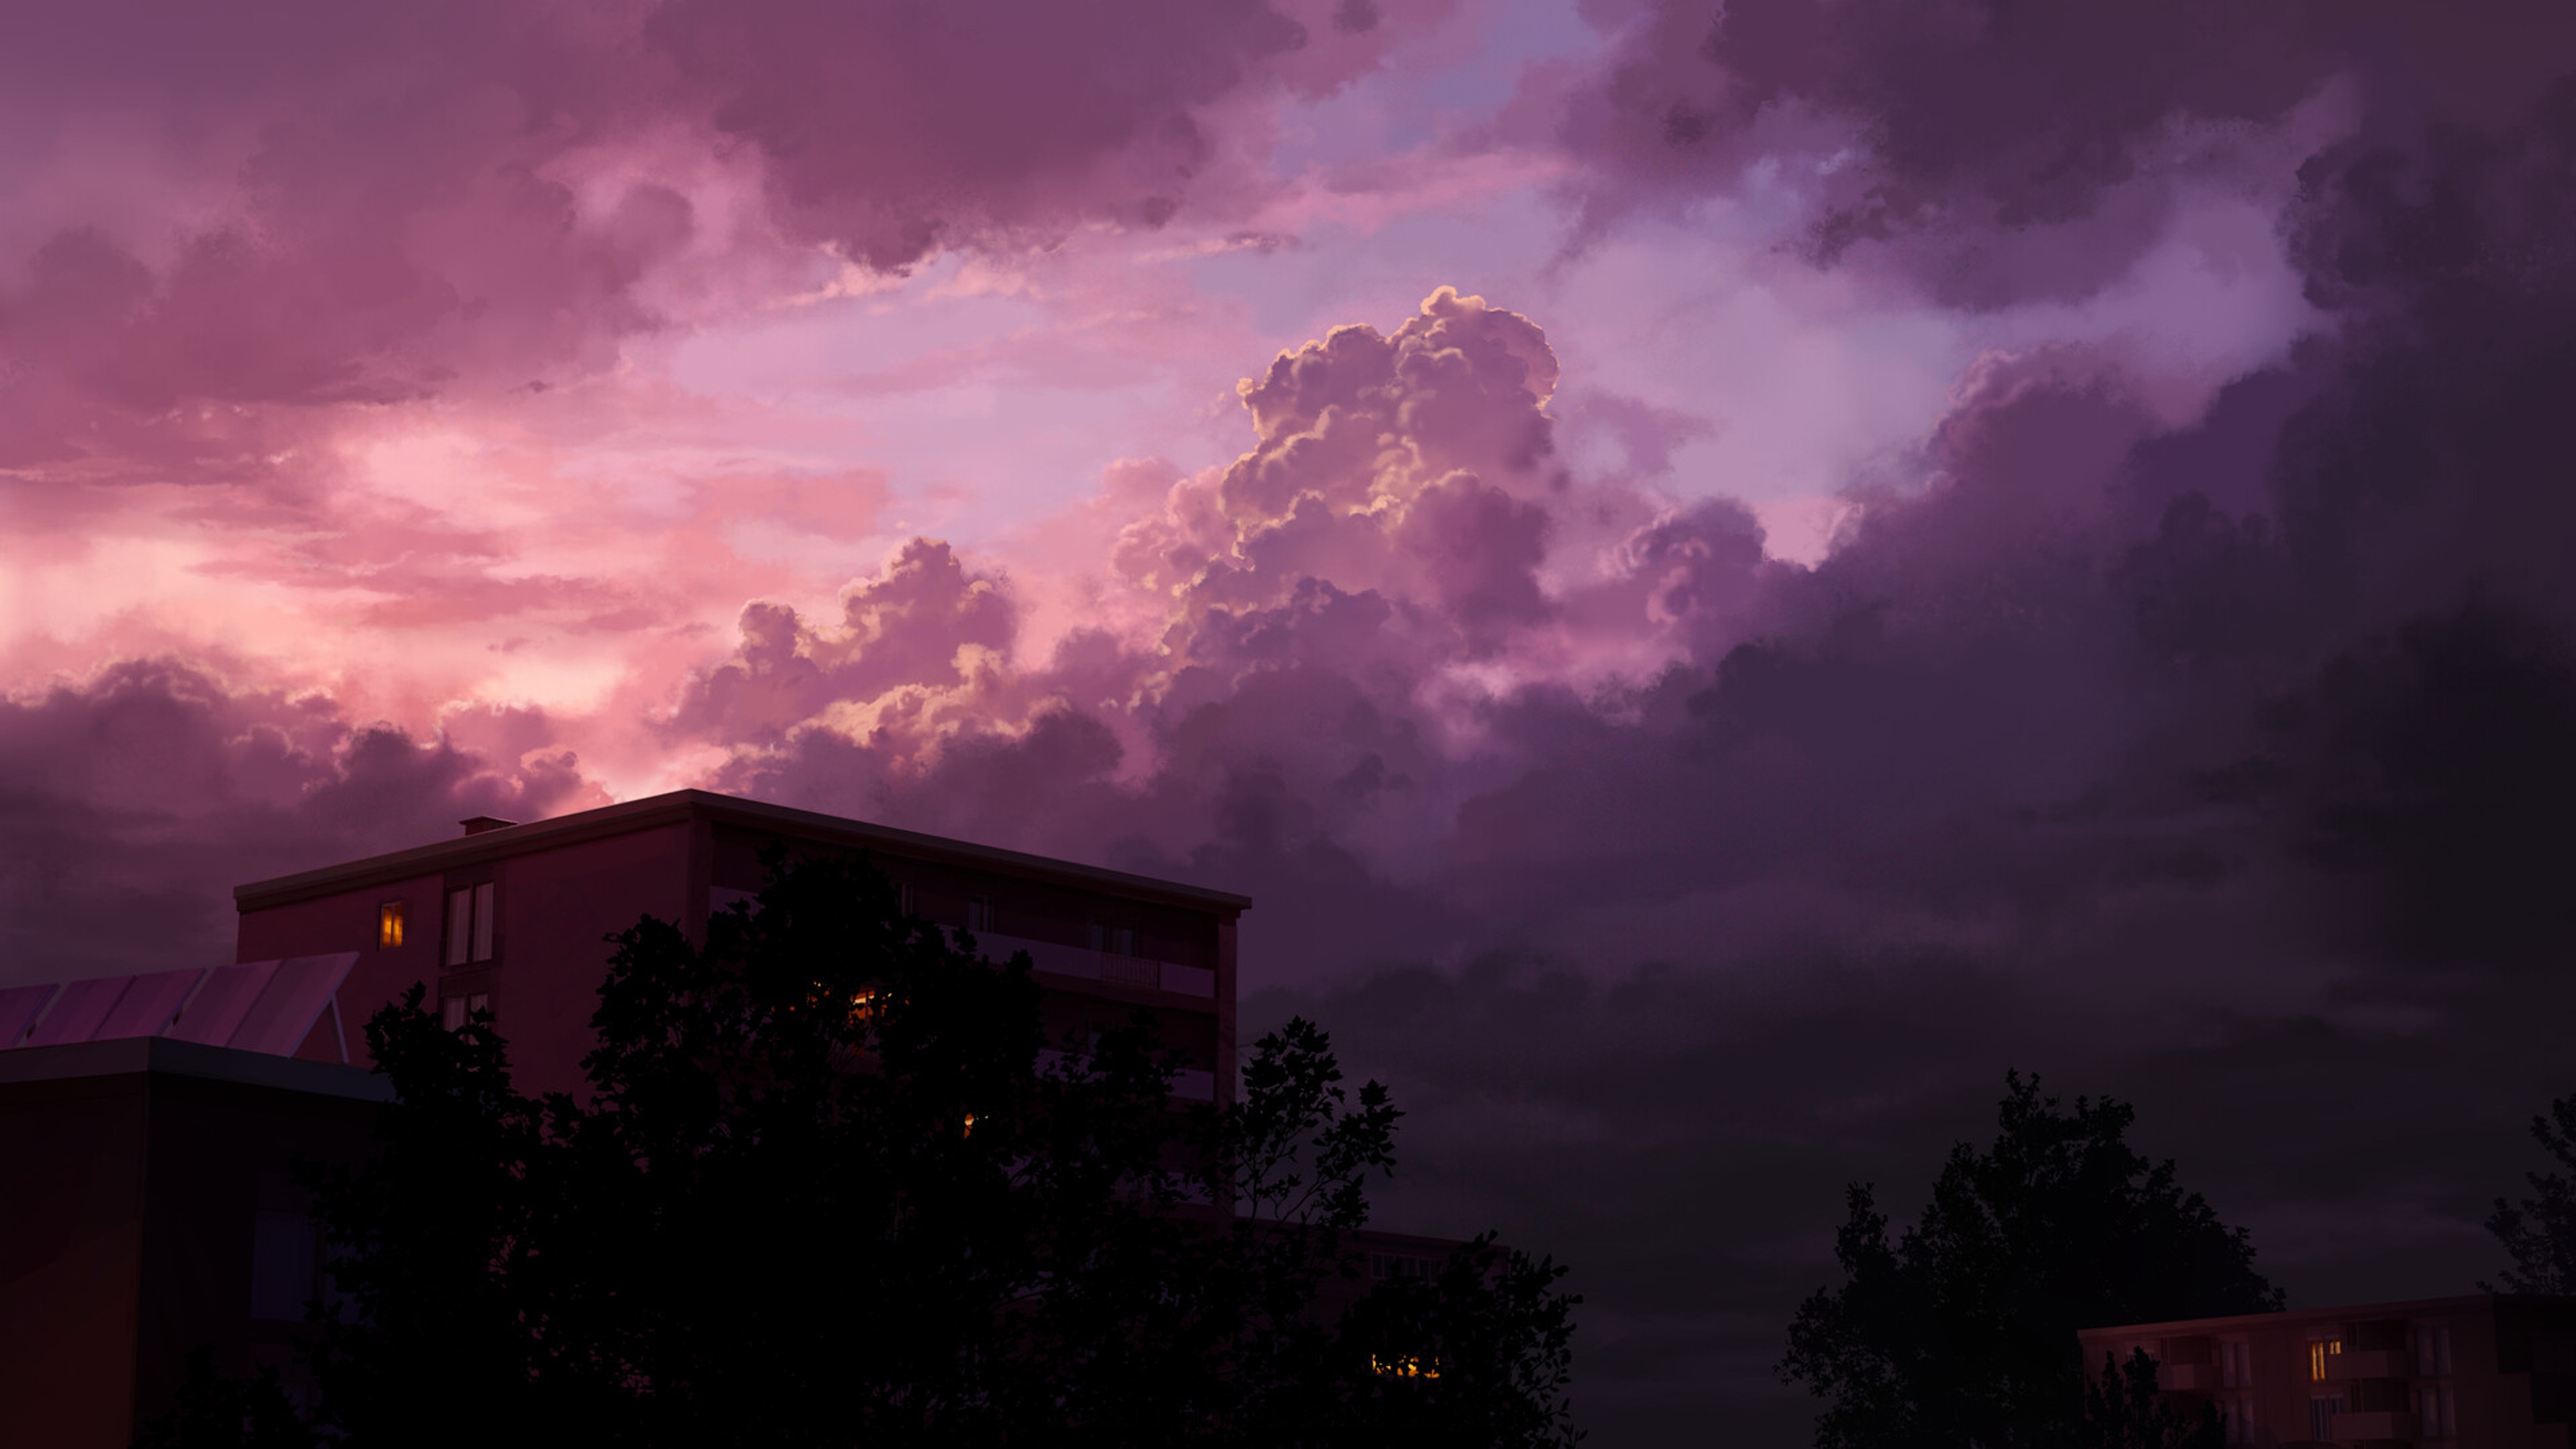 Digital Art Illustration Clouds After Storm Evening Silhouette Trees Building Sky 3840x2160